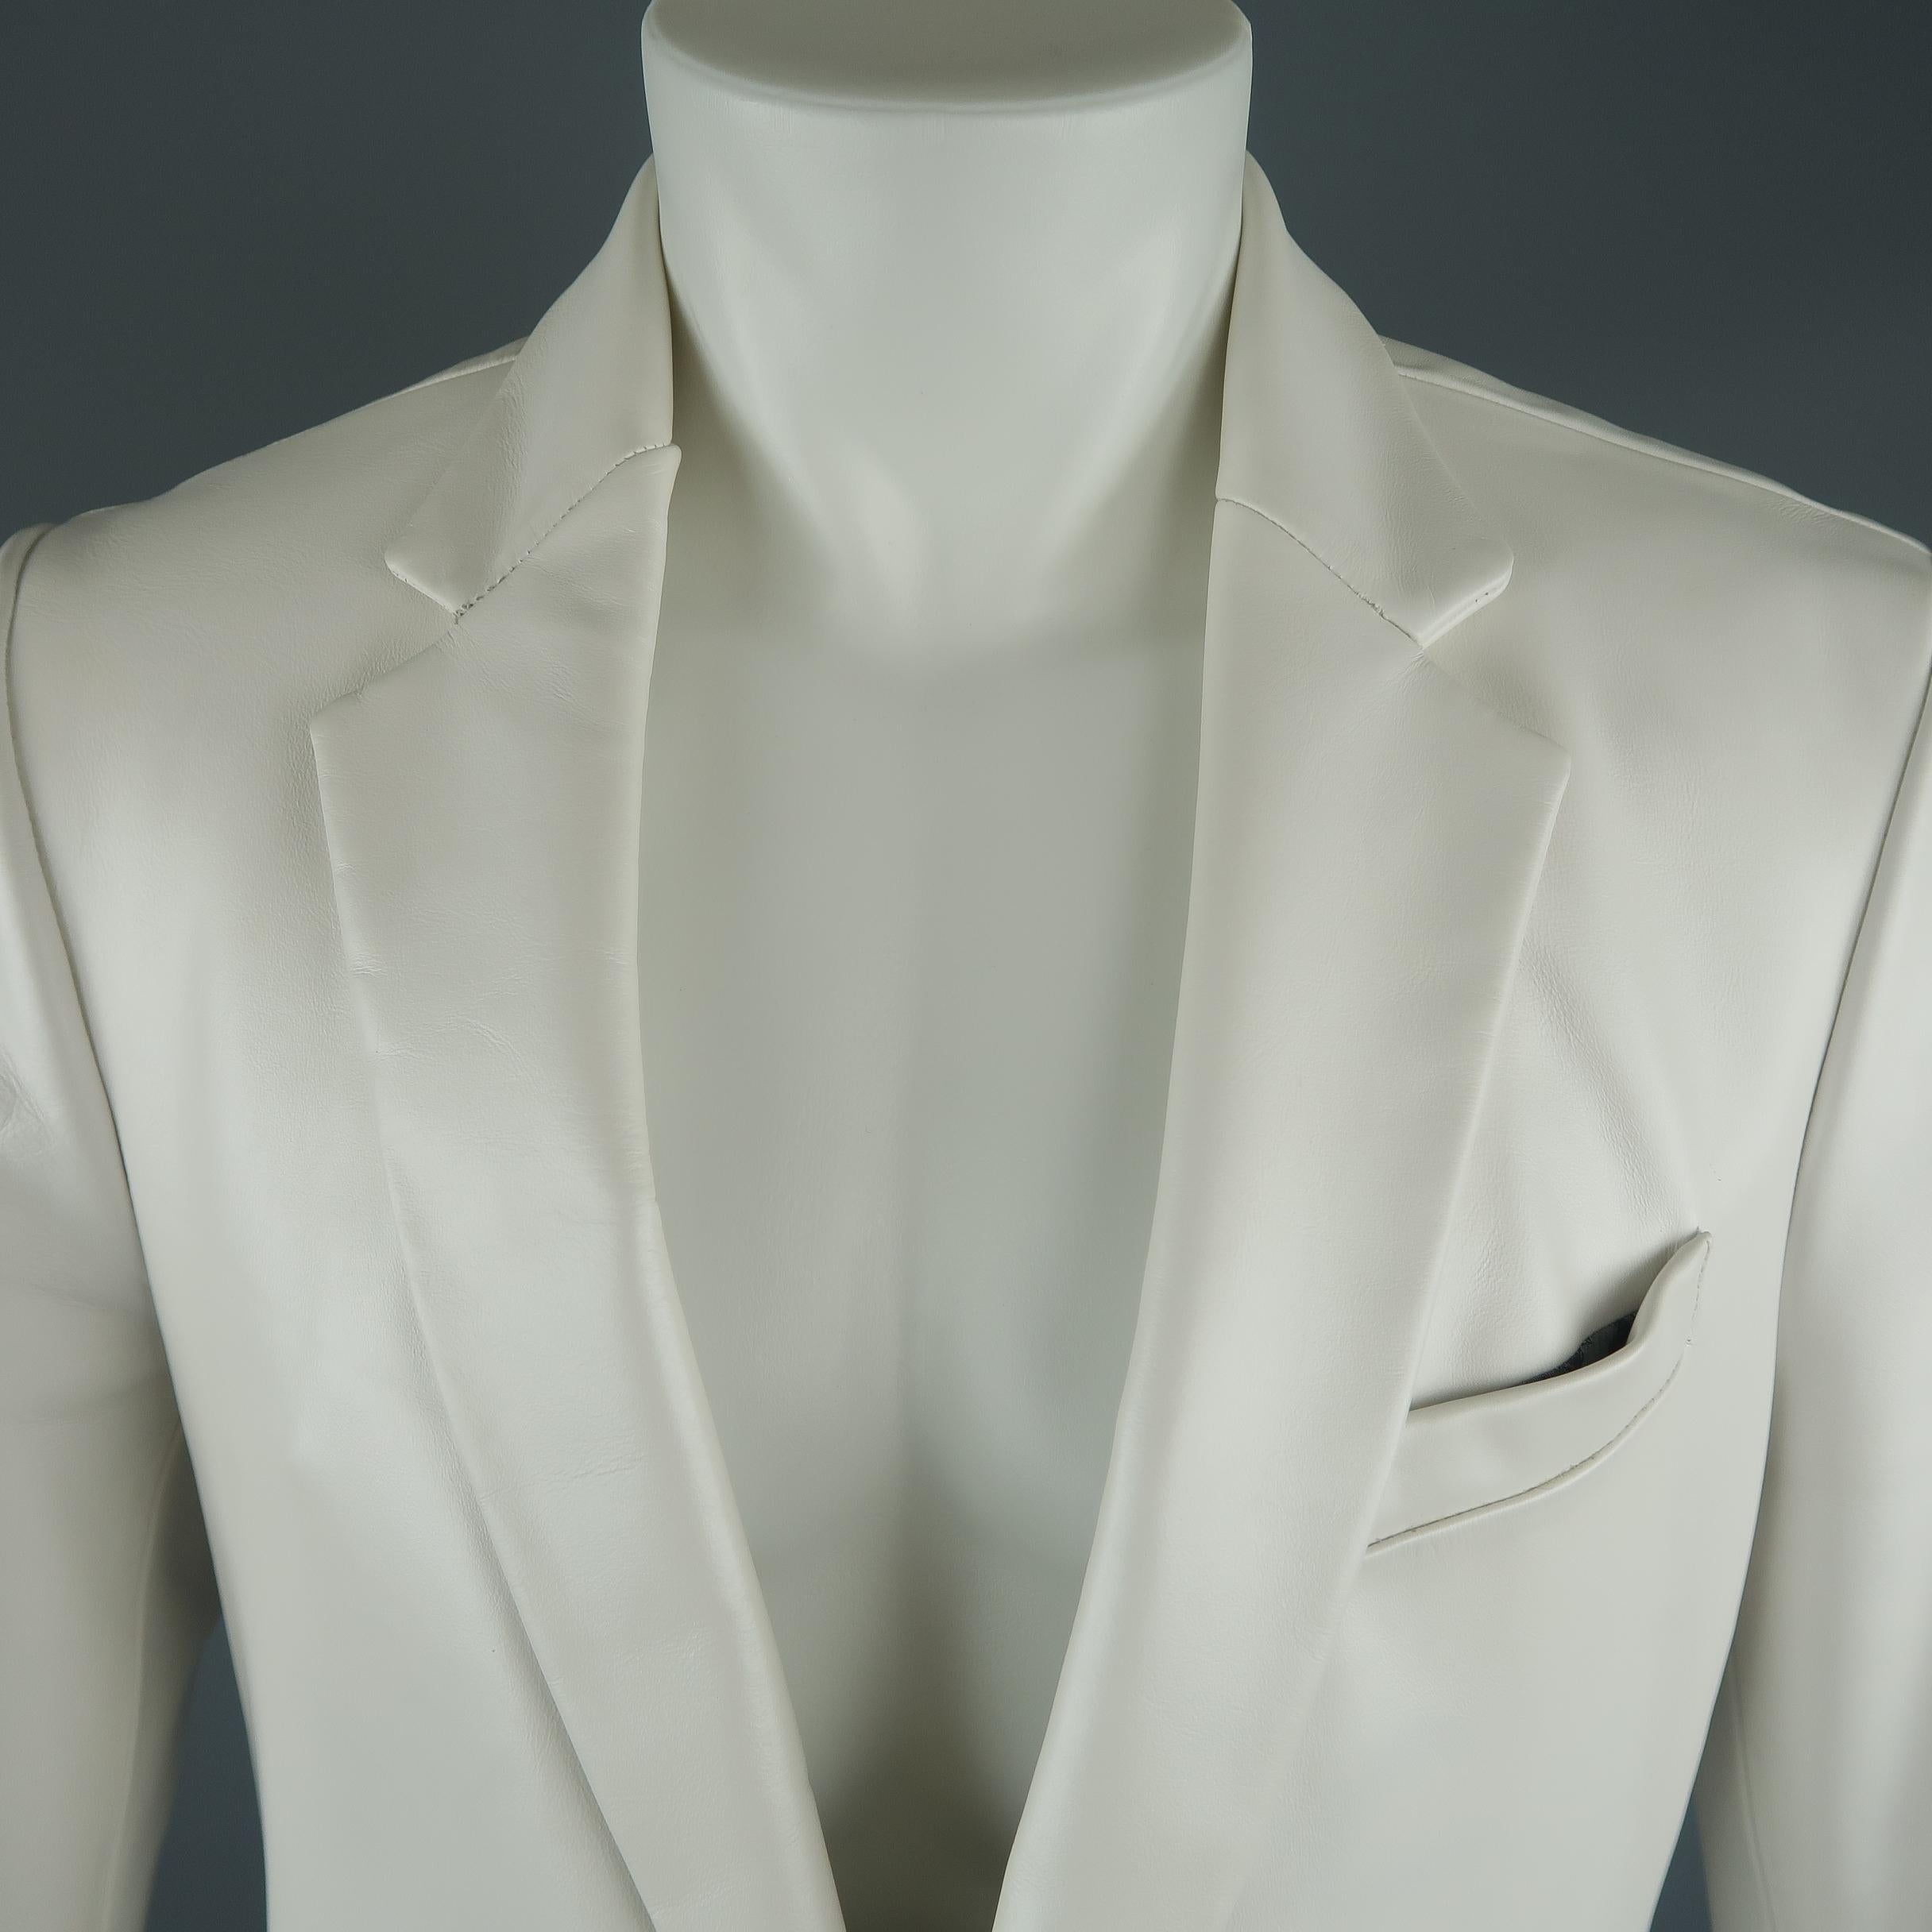 AL'S ATTIRE sport coat comes in white leather with a notch lapel, single breasted two button closure, slit pockets, and silver paisley liner. Custom Made in San Francisco.
 
Excellent Pre-Owned Condition.
Marked: (no size)
 
Measurements:
